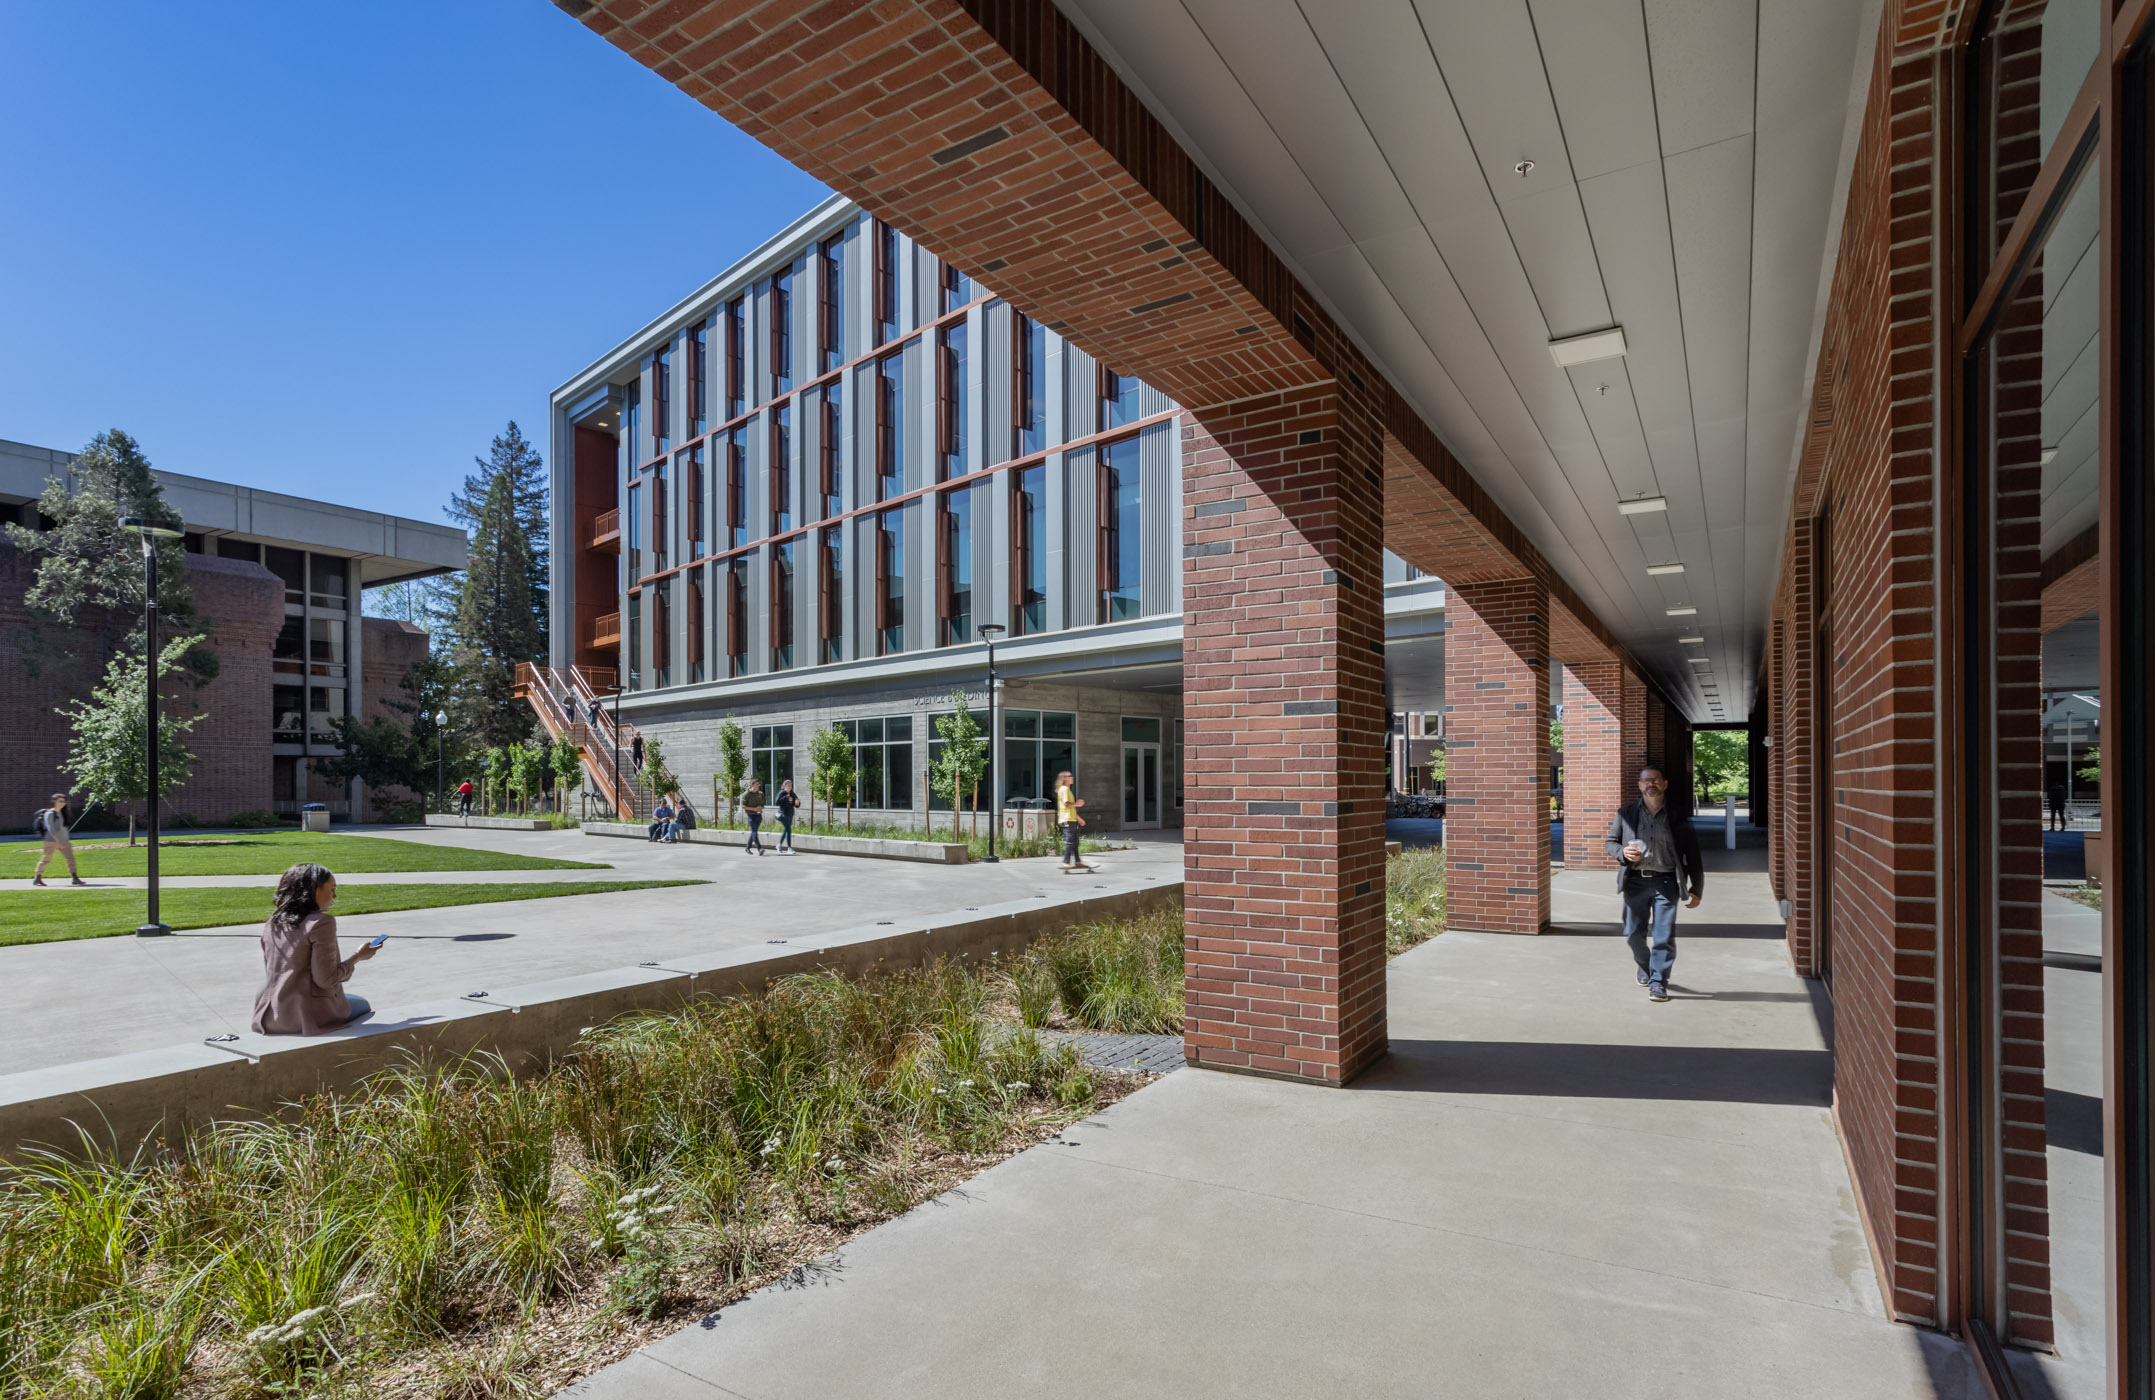 4-21_Smithgroup_ChicoState-2669-Edit_InstitutionsGallery